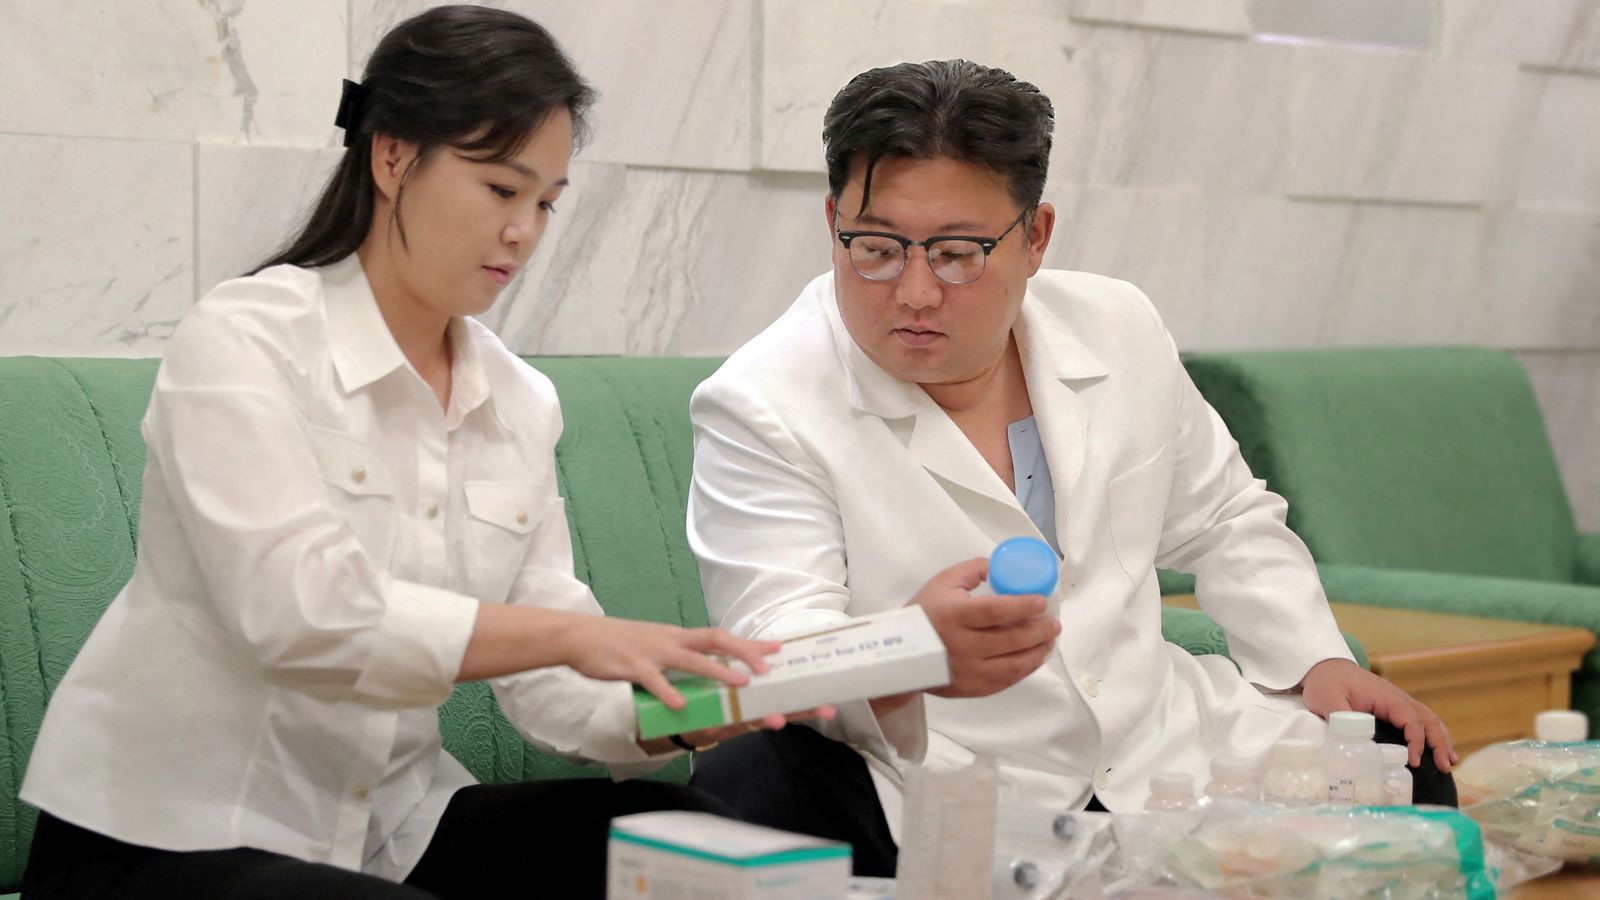 North Korea Says It Has Sent Medicine to 800 Families Amid Outbreak of Mysterious ‘Gastrointestinal Disease’